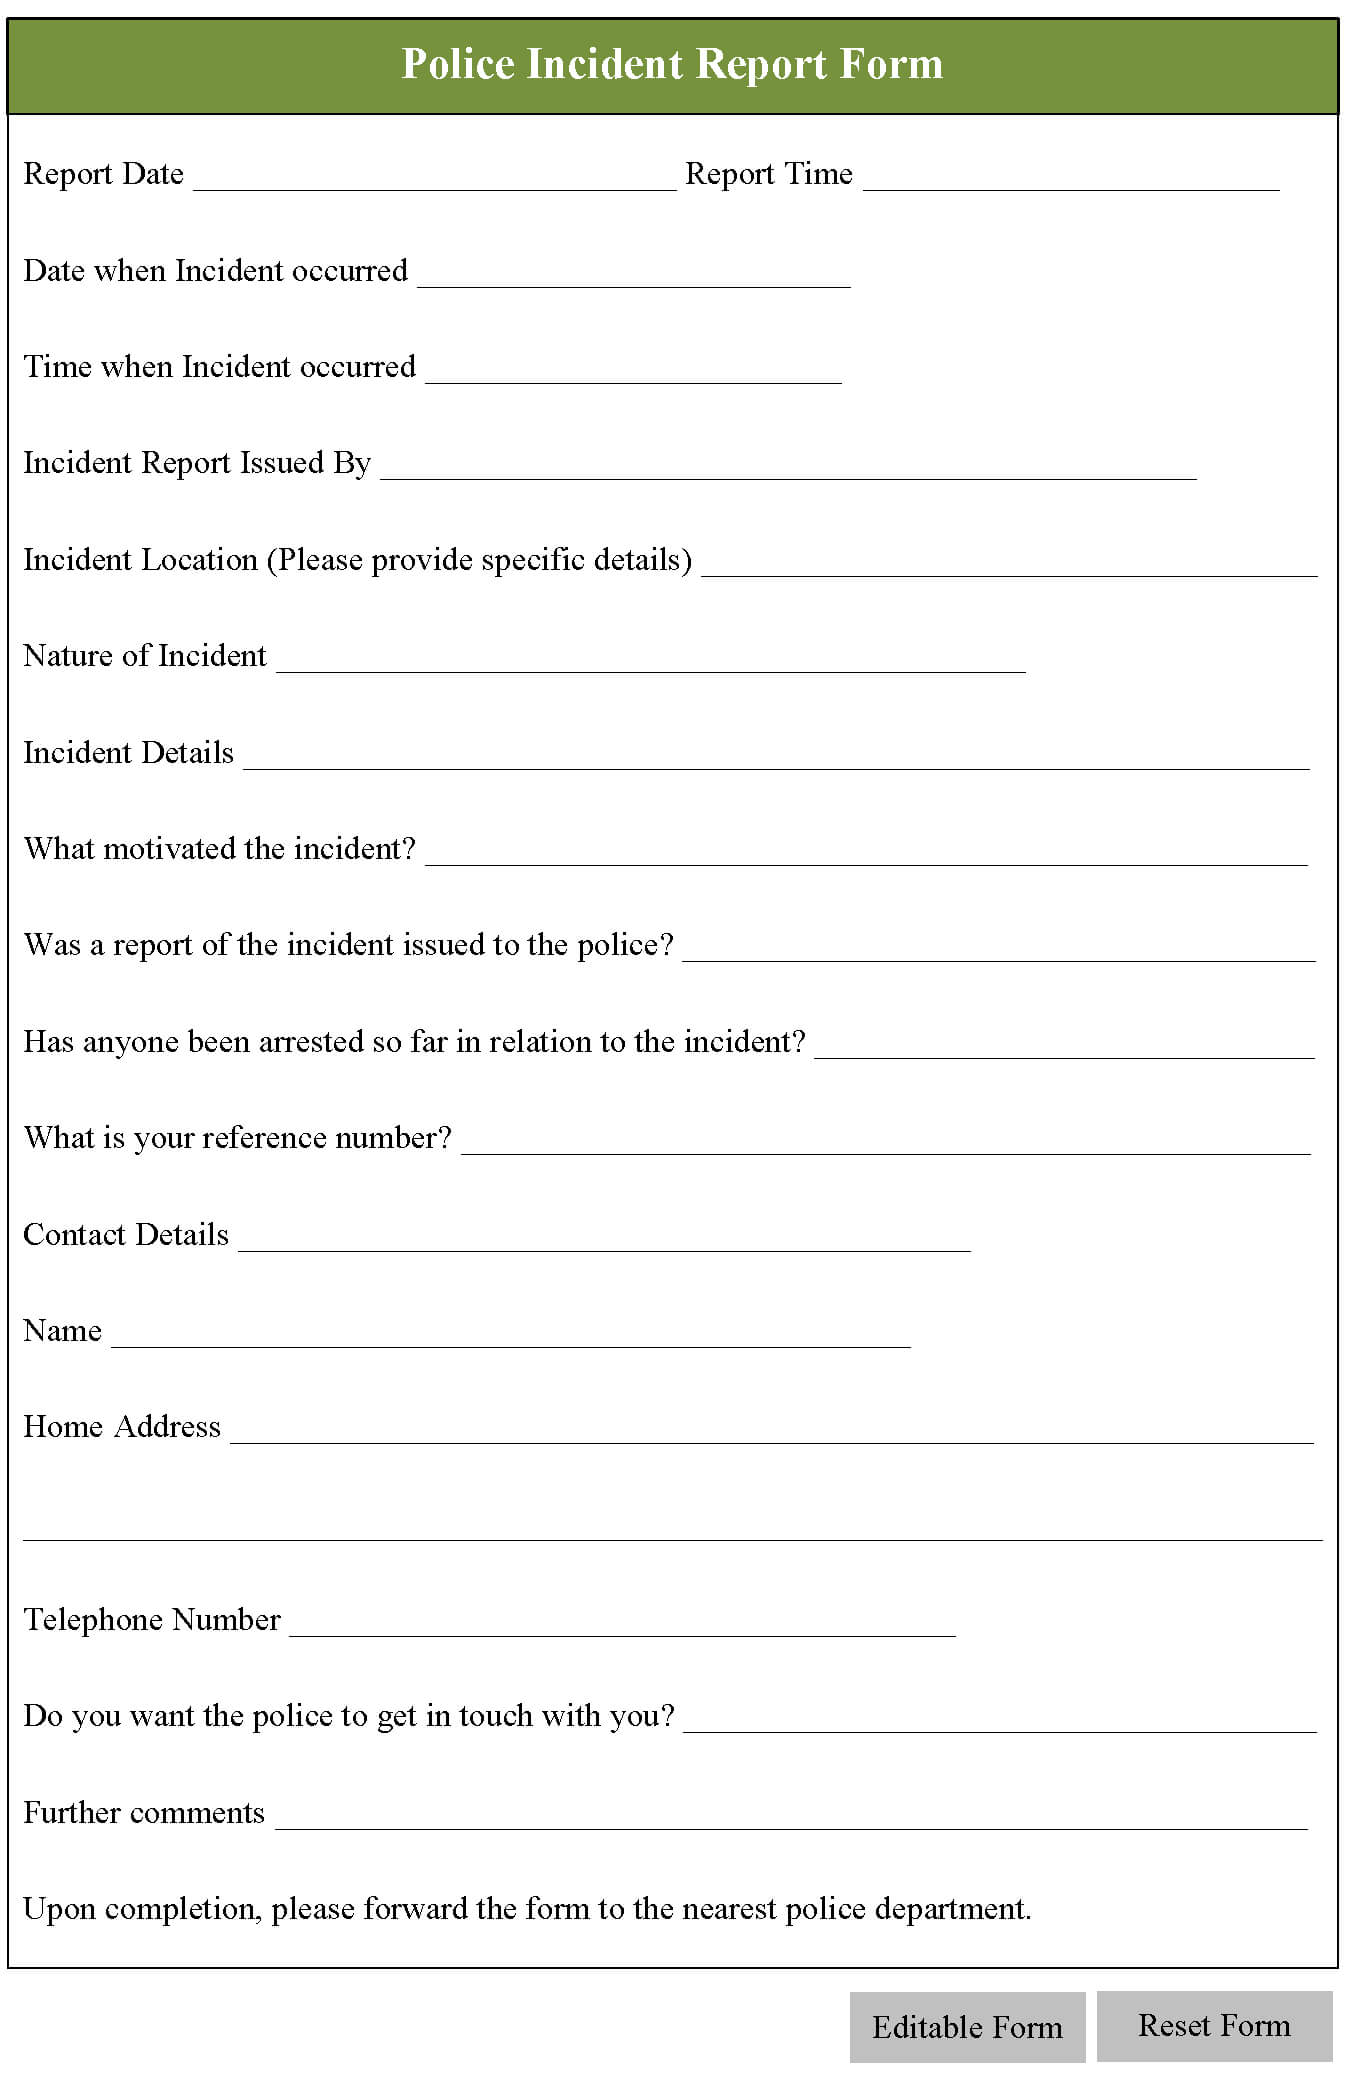 Incident Report Template Nz ] – Incident Accident Report In Police Incident Report Template